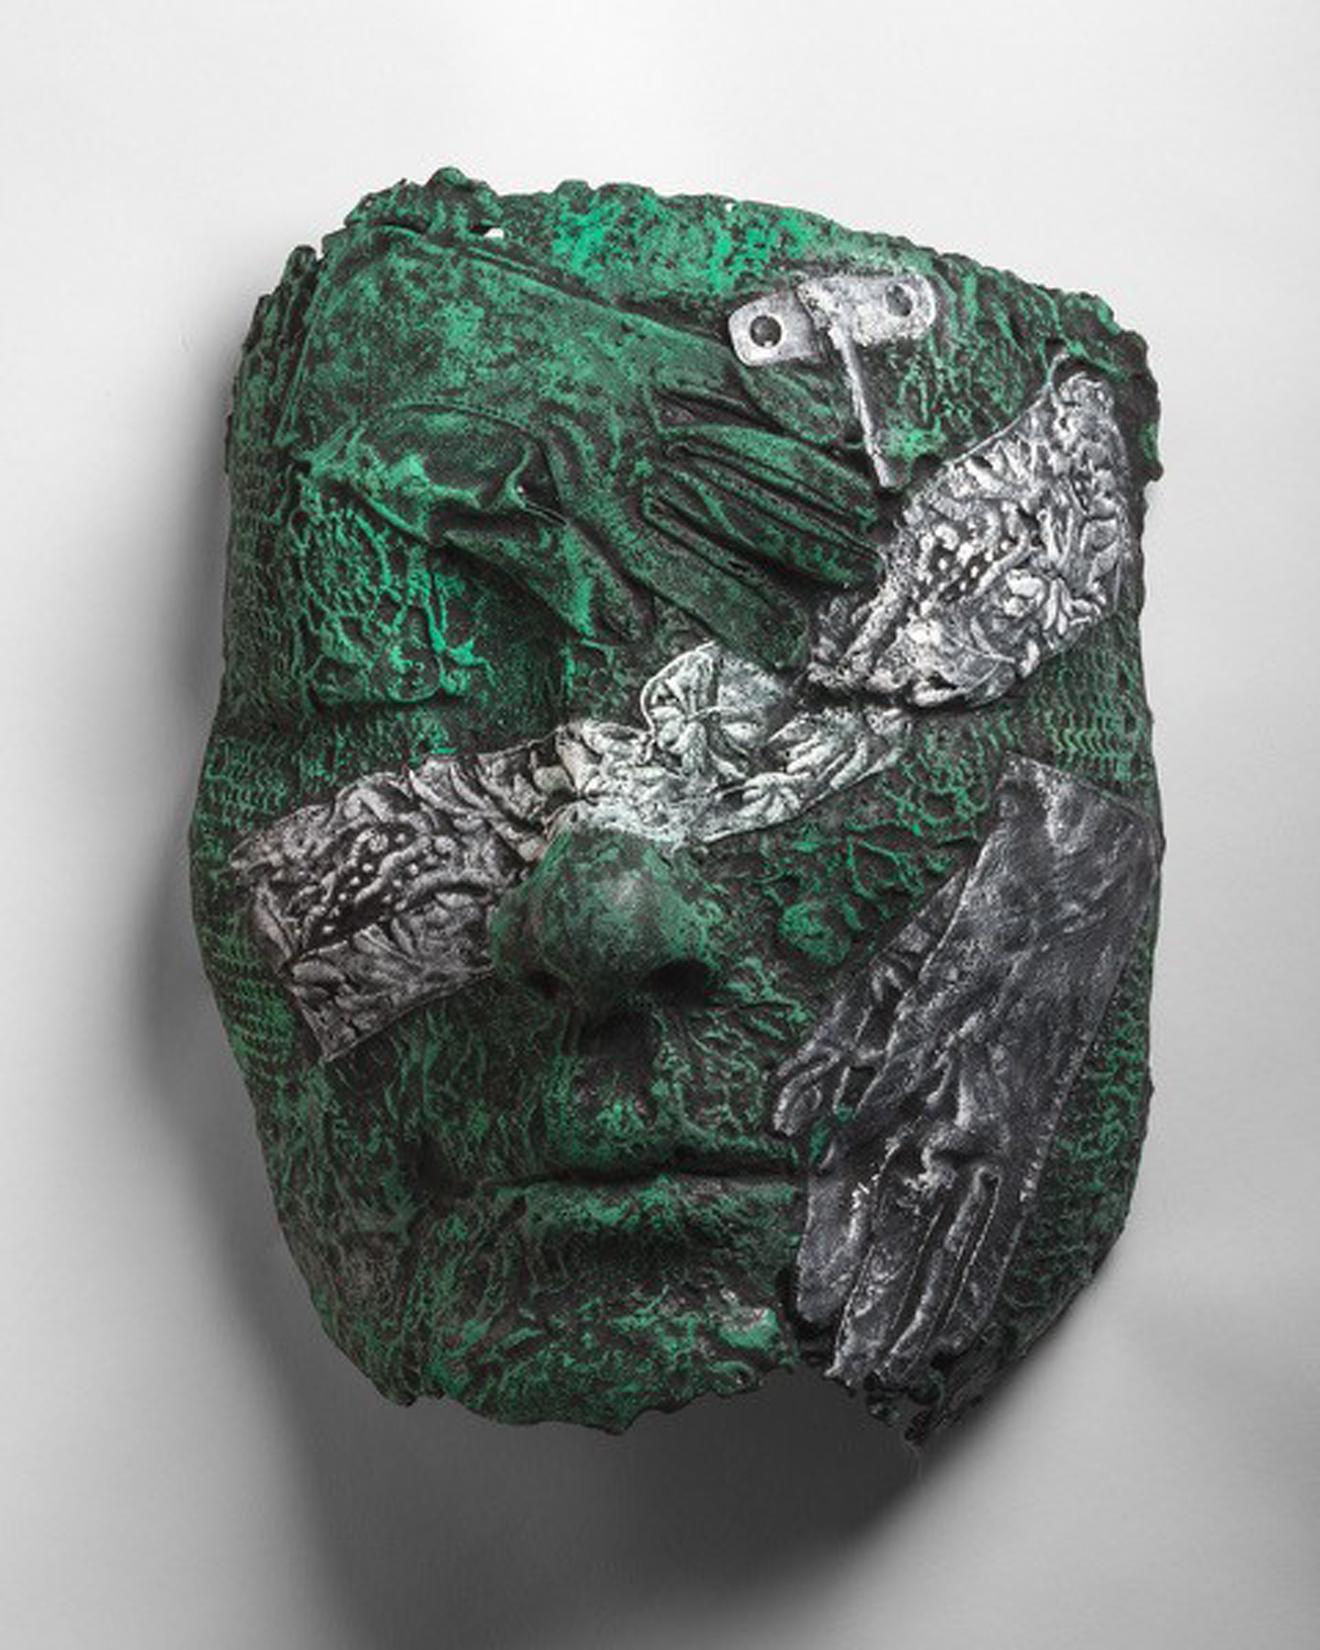 Jonah with Key by Michael Warrick
20x15x4" aluminum, wall mounted sculpture
Fragment of a portrait with impressions of their interests highlighted across the face.

Shipping price includes the custom packing necessary for safe transport of fine